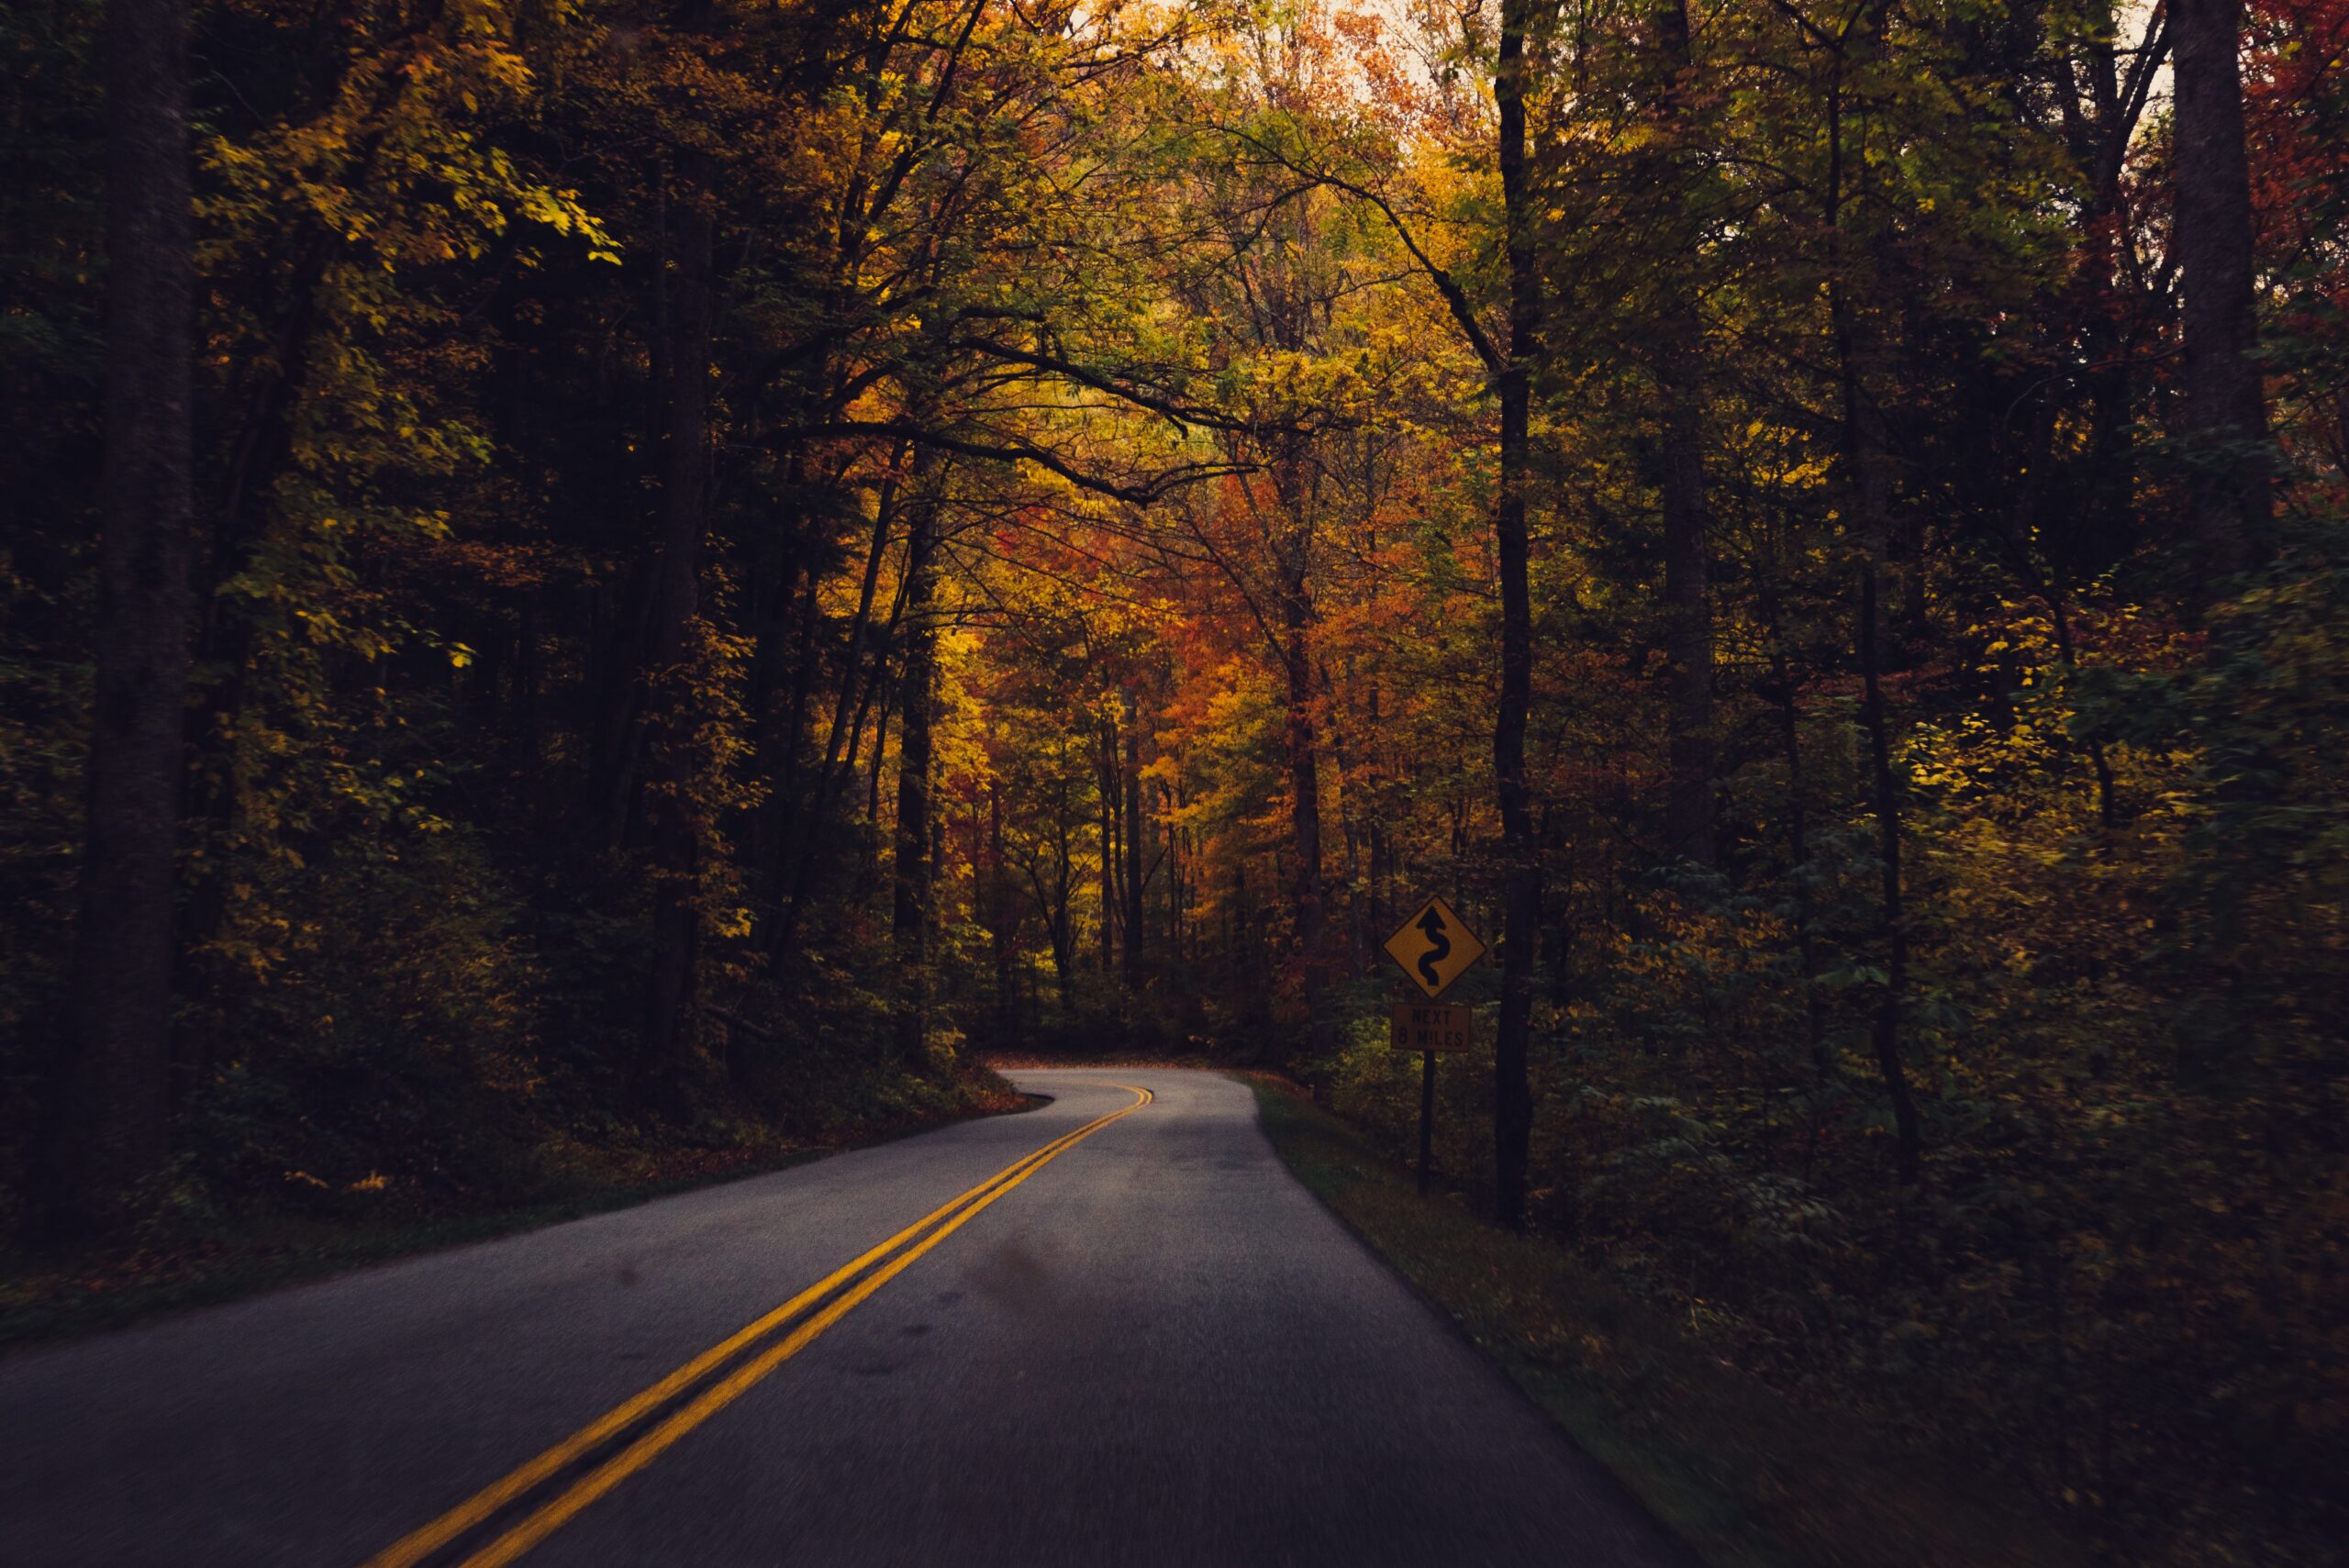 A winding autumnal forest road with a road sign warning of curves ahead.